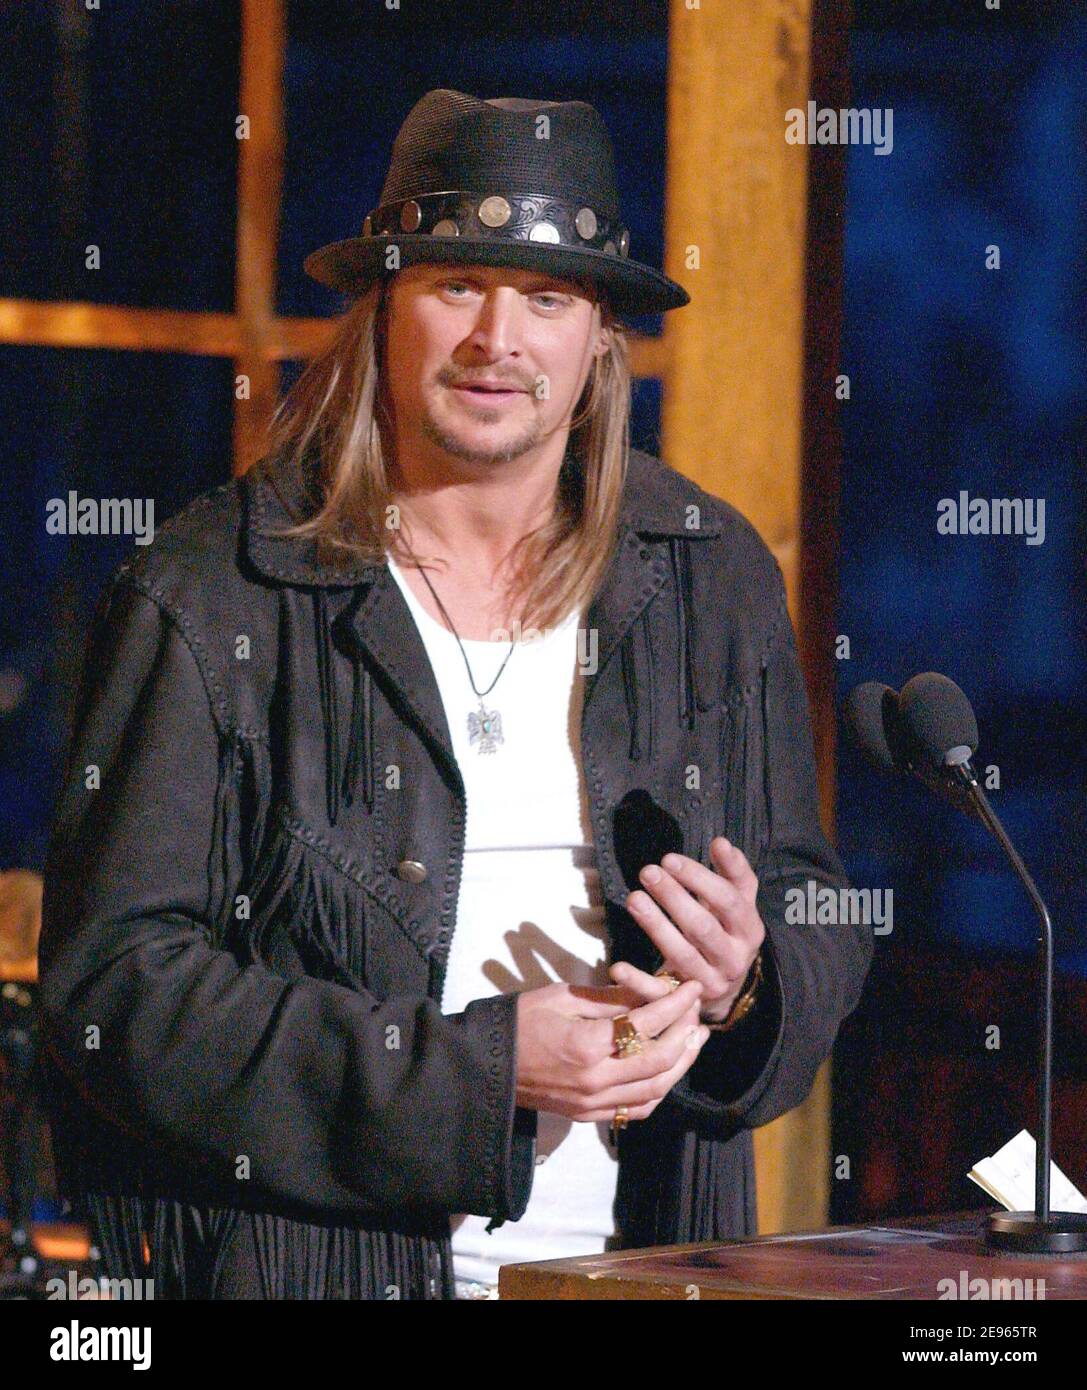 Presenter Kid Rock at the 21st Annual Rock & Roll Hall of Fame Induction Dinner held at the Waldorf Astoria in New York, NY, USA on March 13, 2006. Photo by Nicolas Khayat/ABACAPRESS.COM Stock Photo